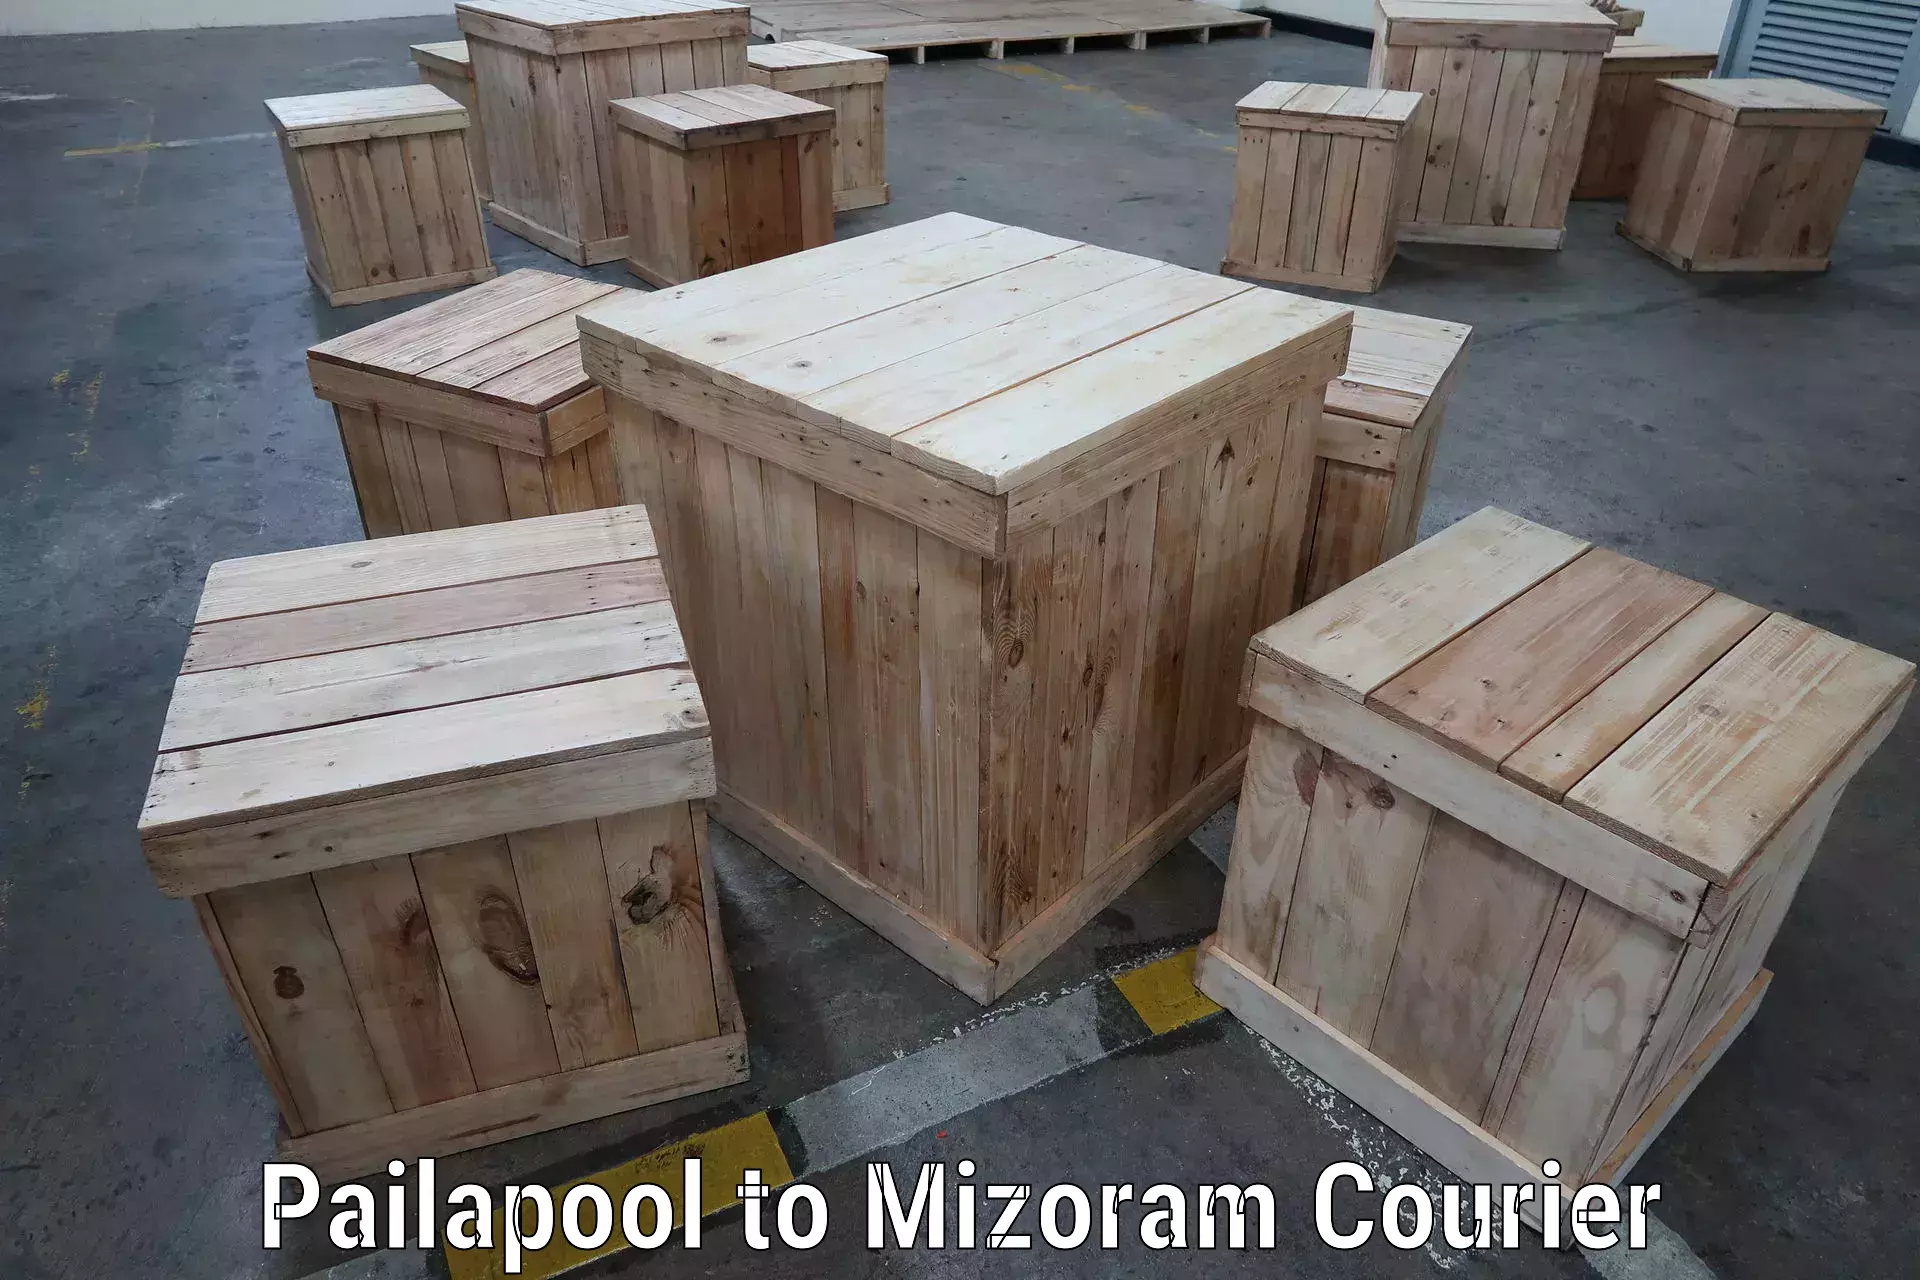 Advanced parcel tracking in Pailapool to Mizoram